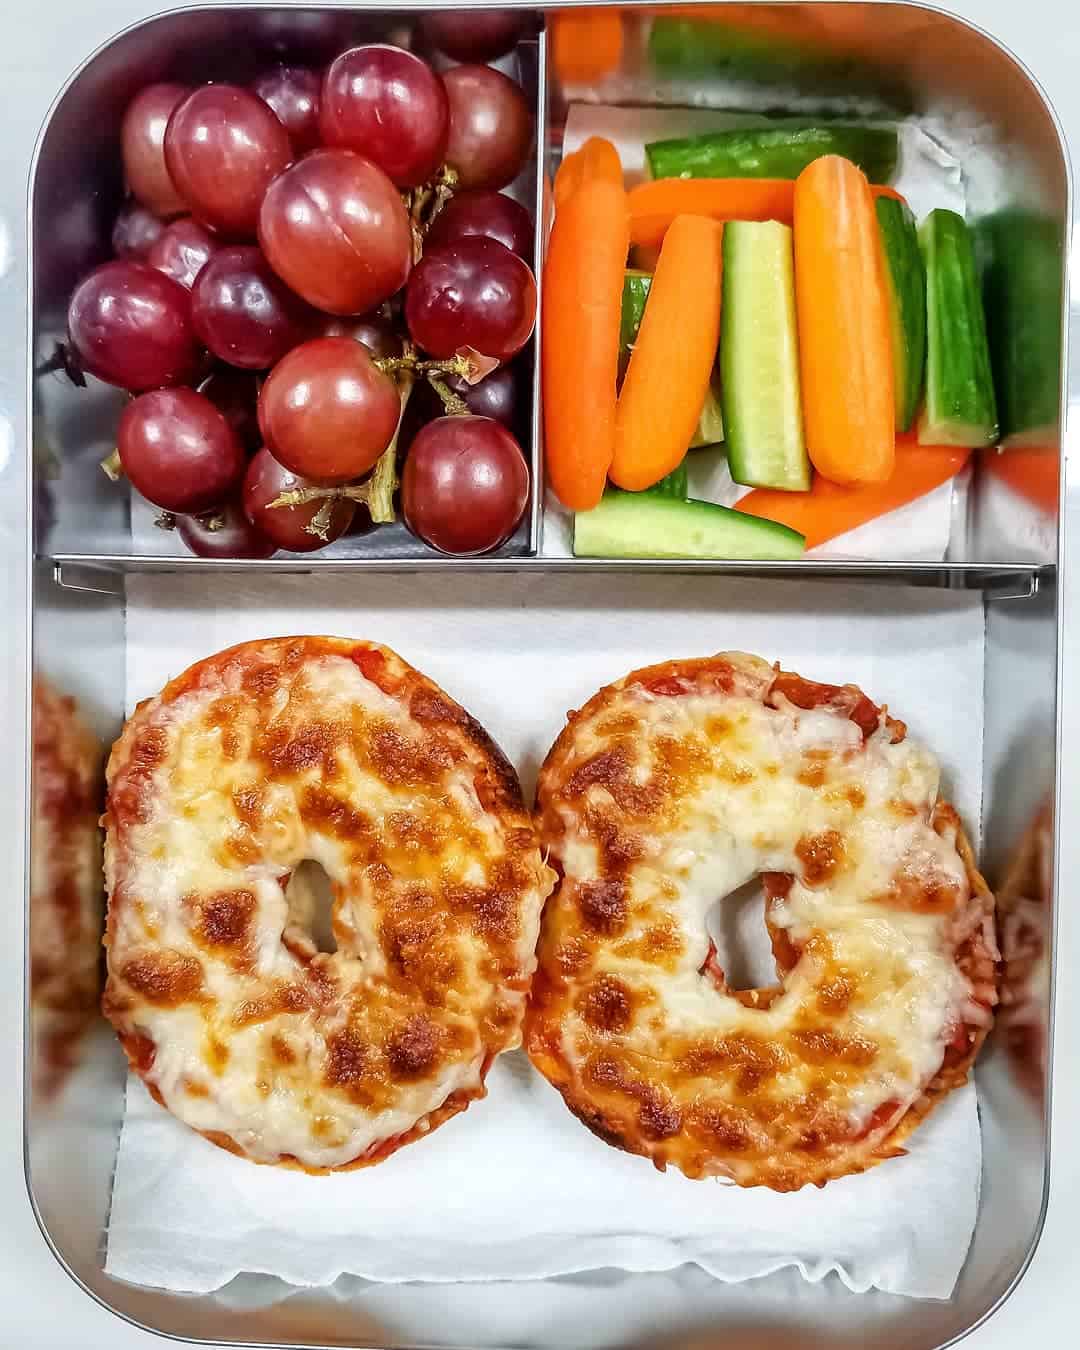 bagel pizza, cucumber & carrot sticks,red grapes